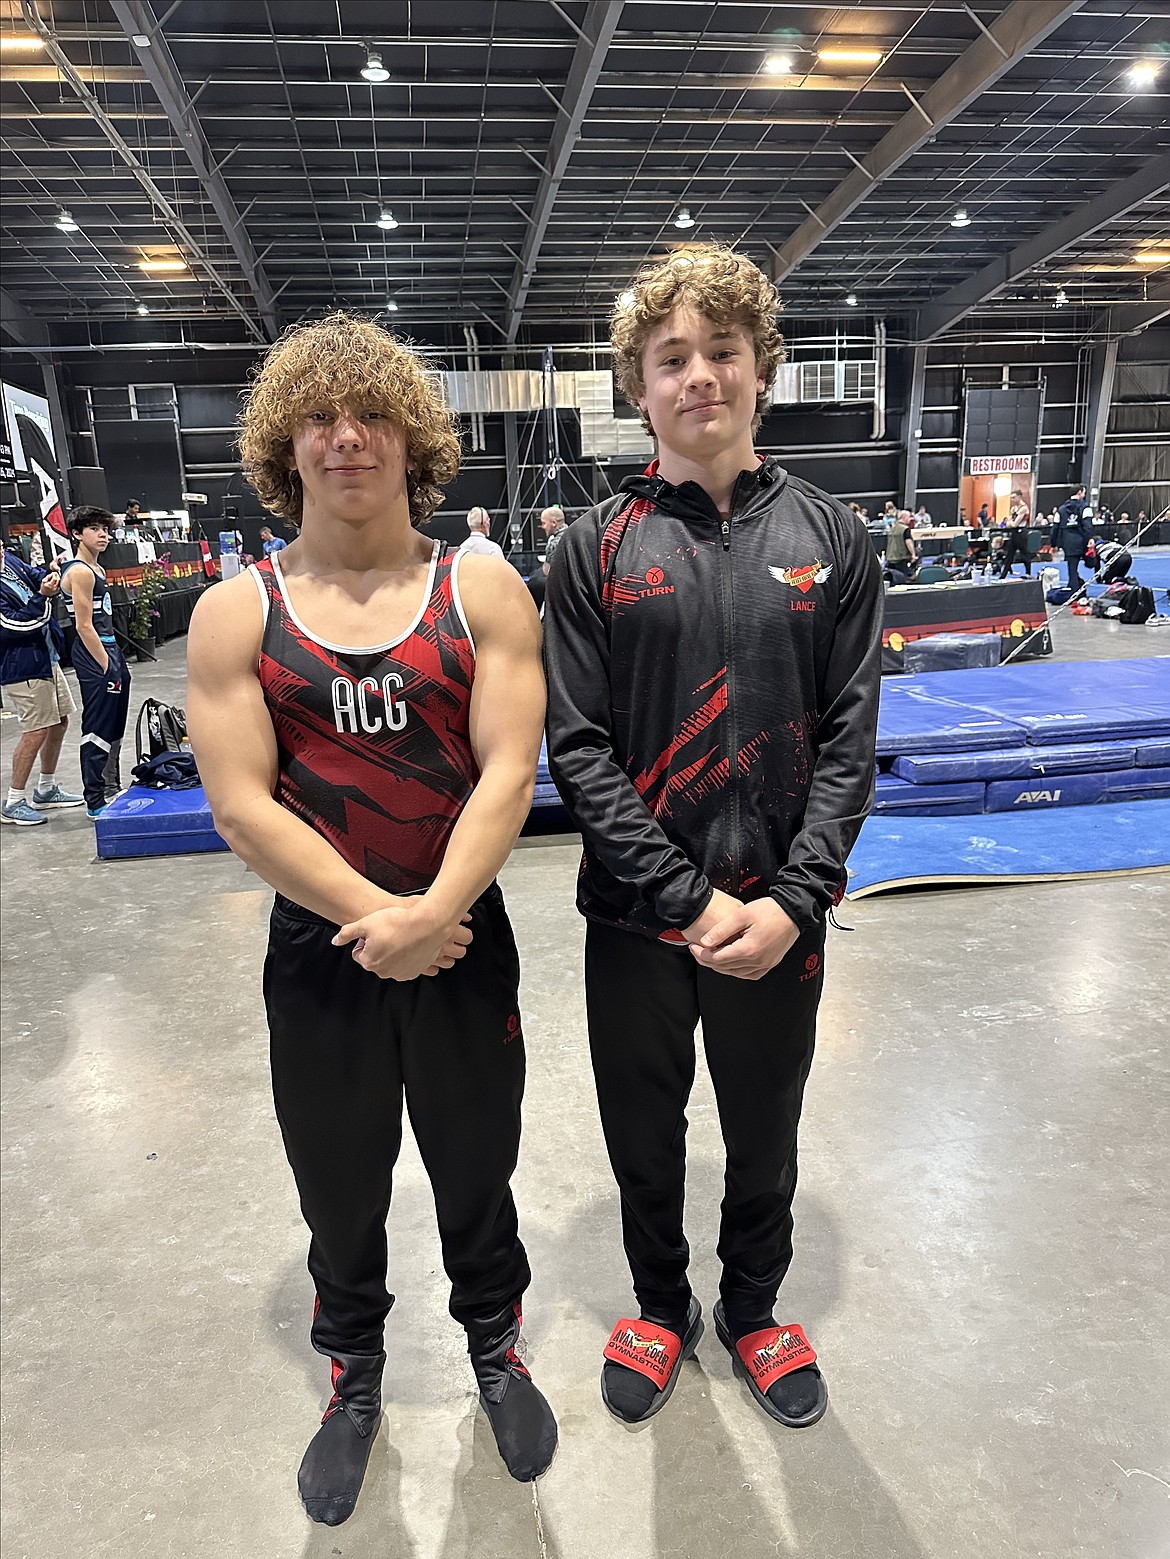 Courtesy photo
Avant Coeur Gymnastics Level 9s at the Western National Championships in Chandler, Ariz. From left are Conan Tapia and Lance Mosher.